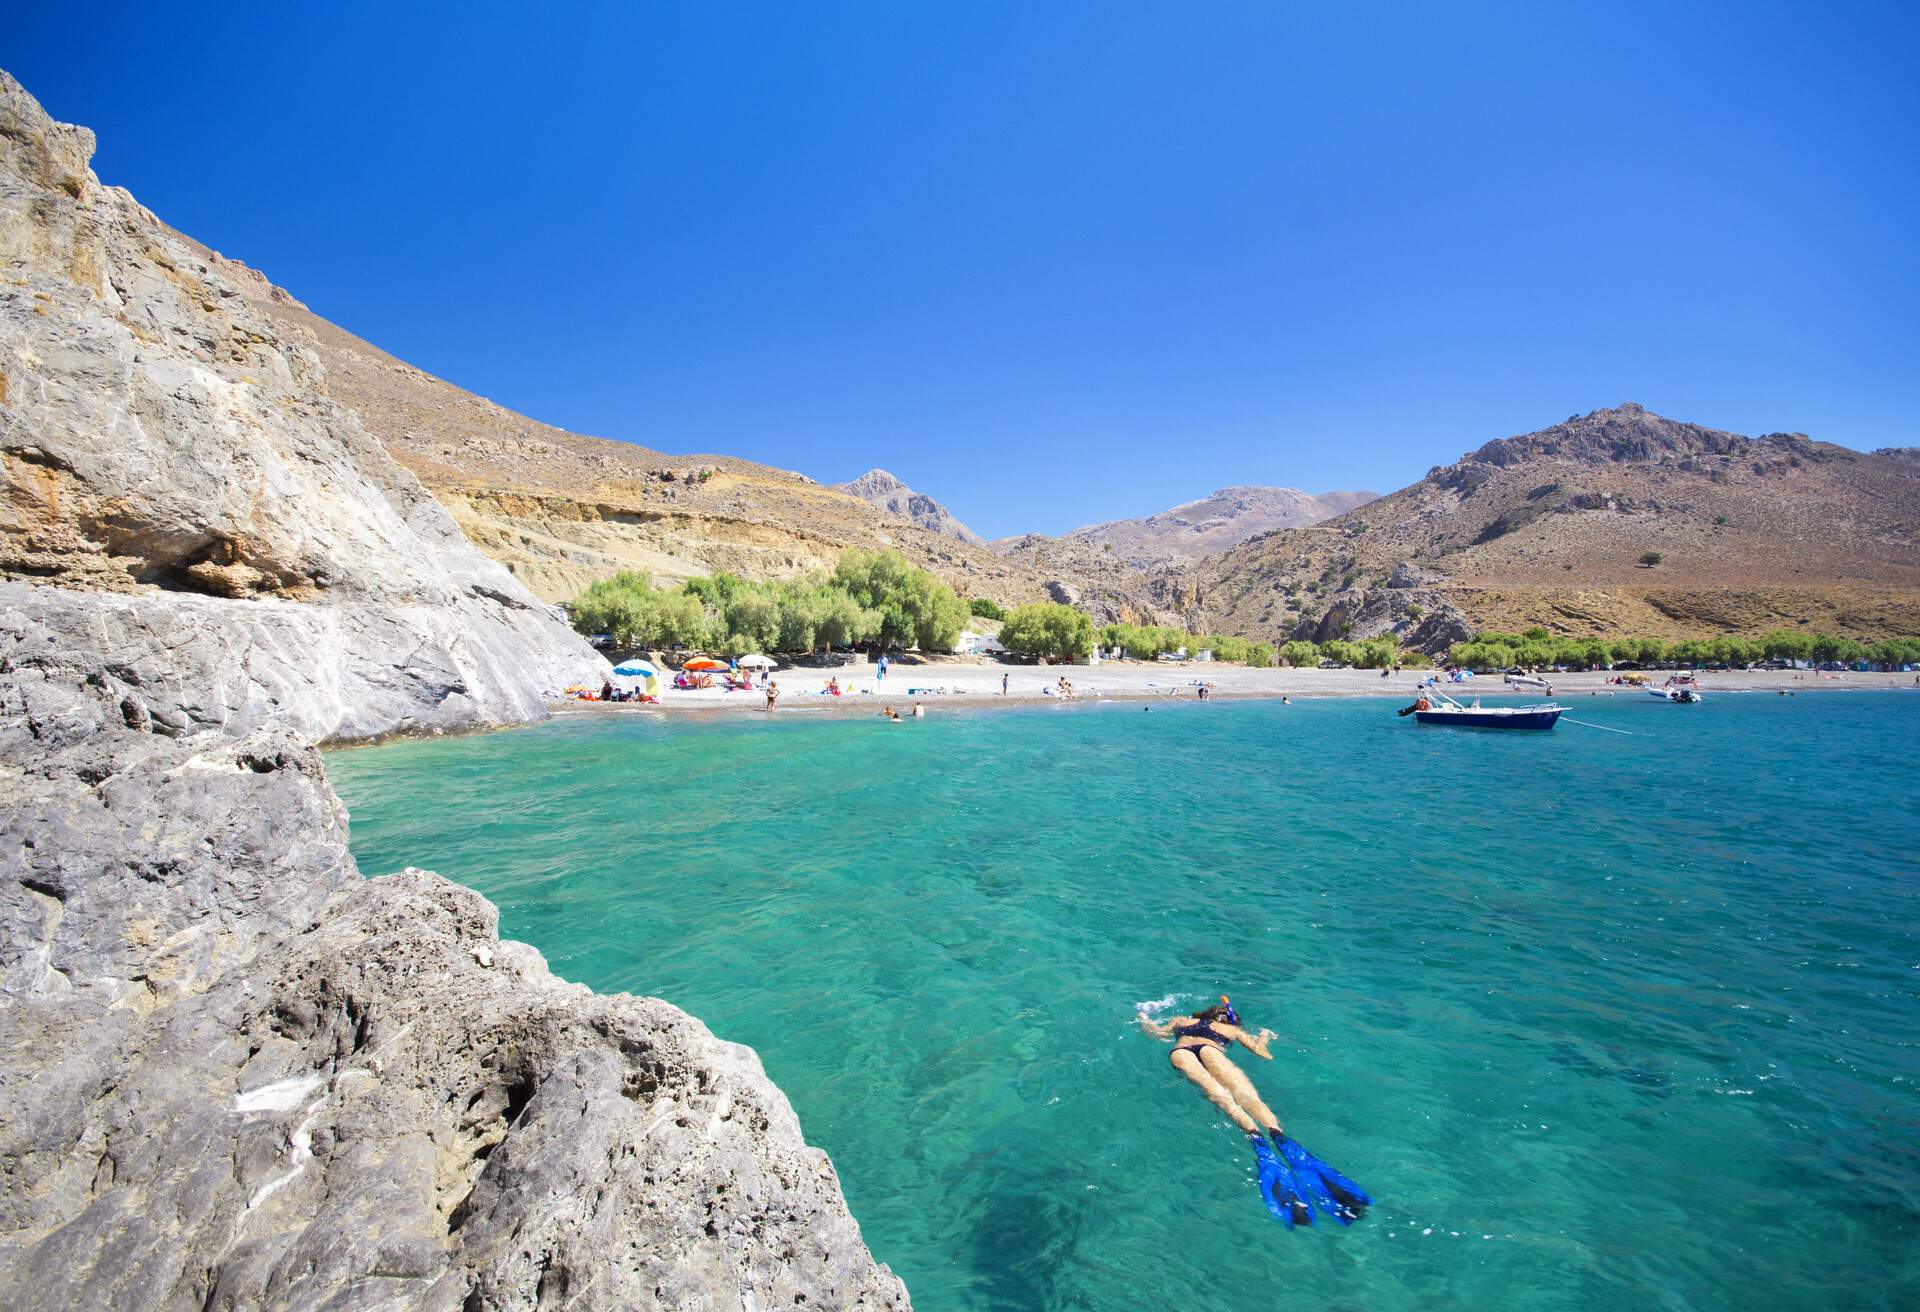 The amazing tropical beach of Panagia Tripiti, in Crete, Greece, with sandy beach, turquoise water and some lucky campers.; Shutterstock ID 689170300; Brand (KAYAK, Momondo, Any): any